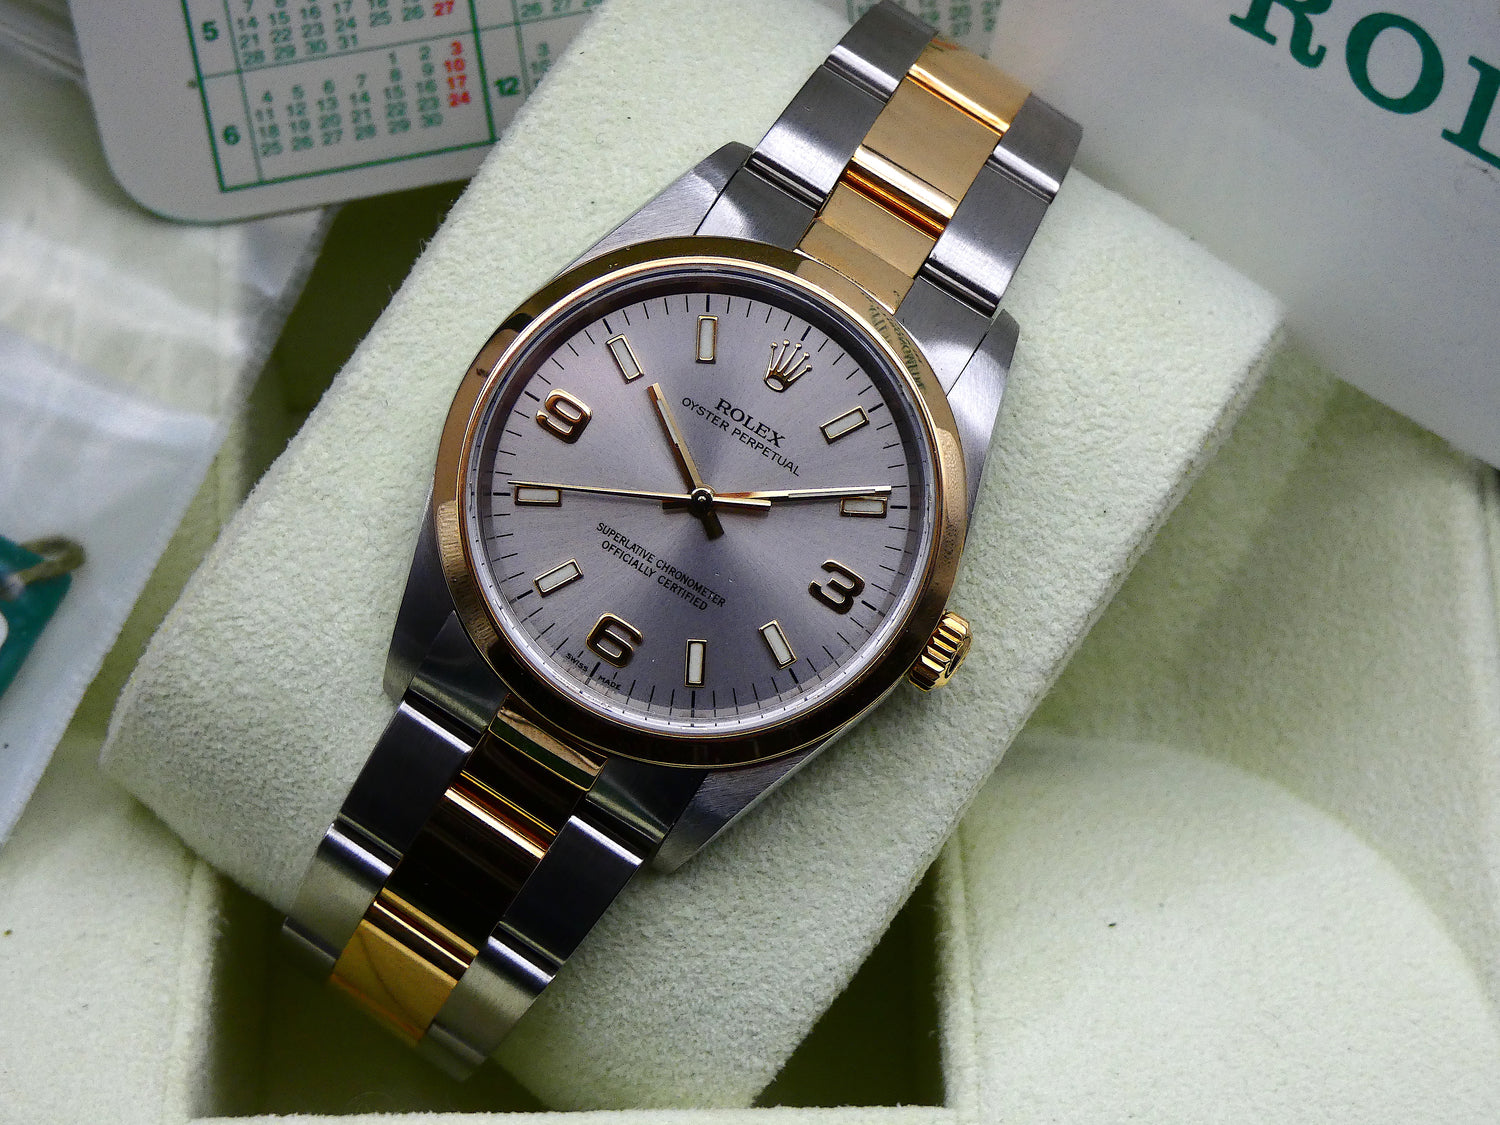 SOLD Rolex Oyster Perpetual 34 full set mint 14203M